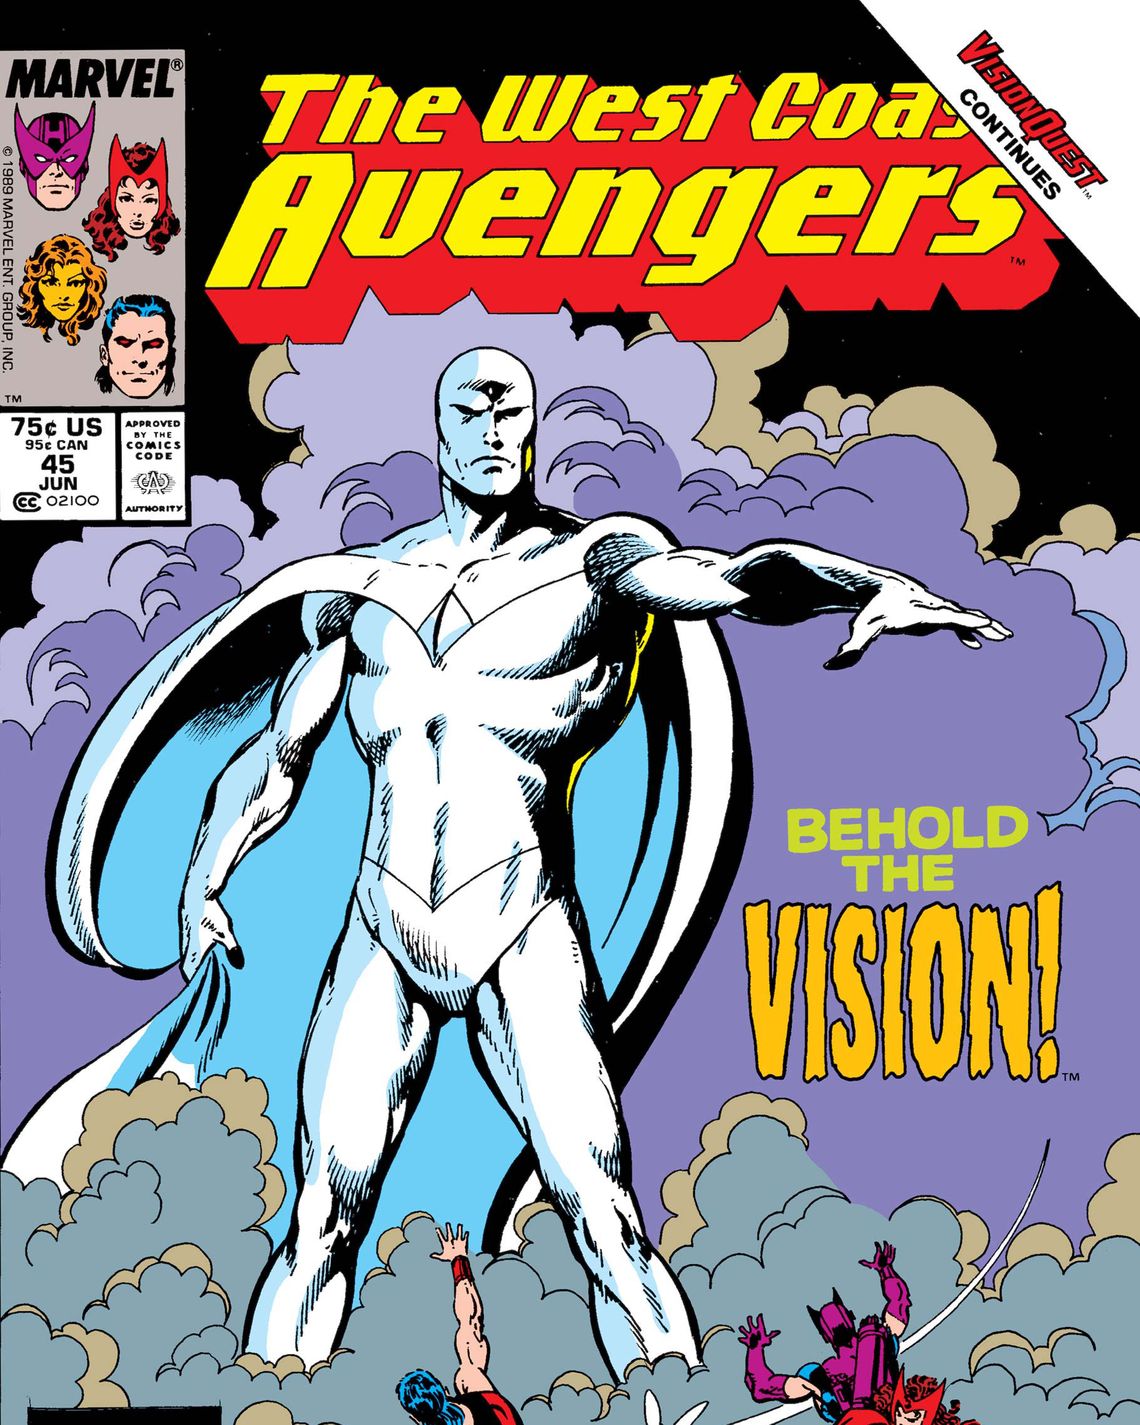 White Vision: The Comics History of that WandaVision Reveal